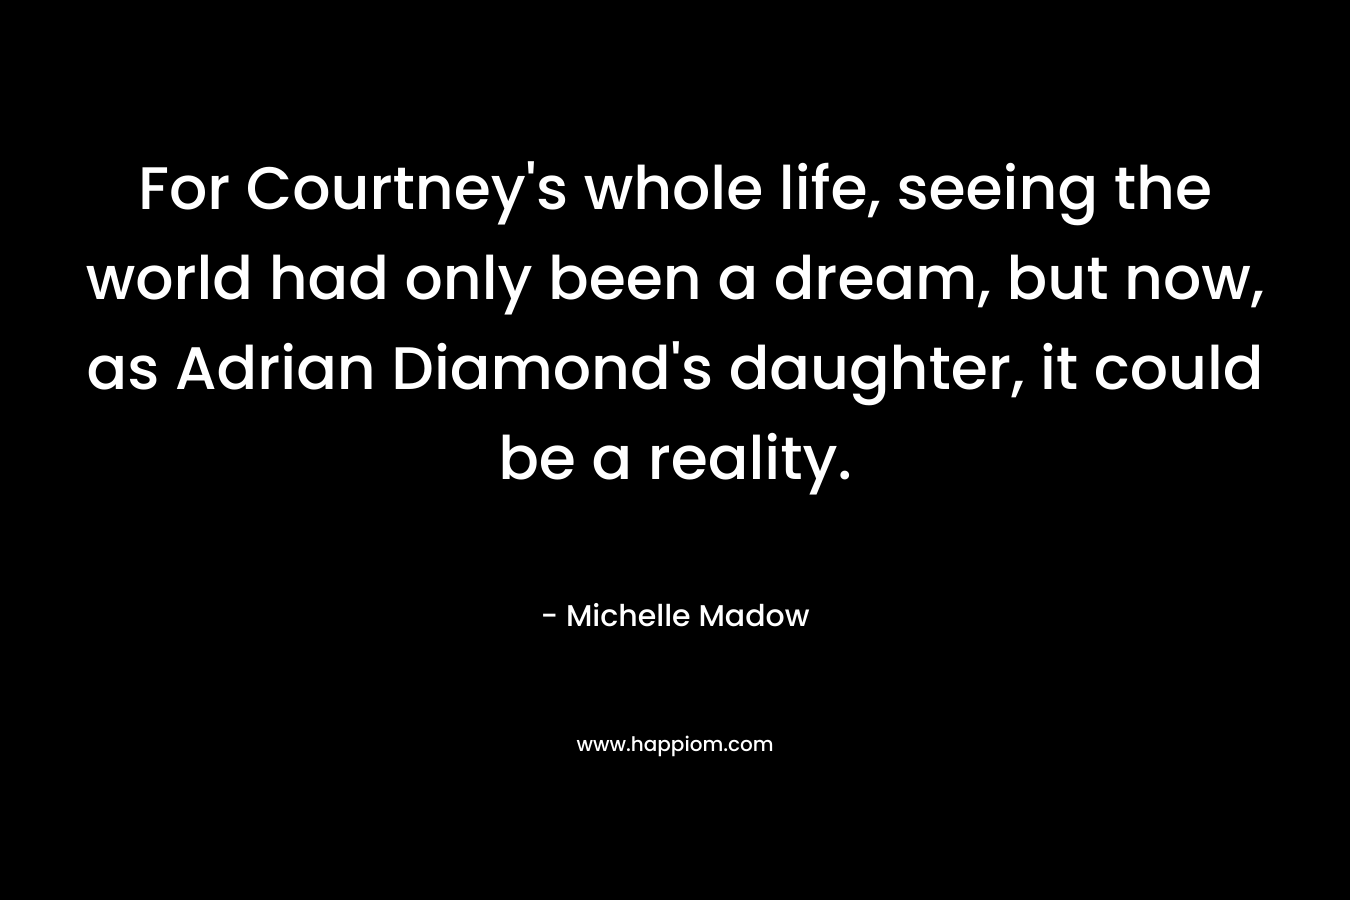 For Courtney’s whole life, seeing the world had only been a dream, but now, as Adrian Diamond’s daughter, it could be a reality. – Michelle Madow